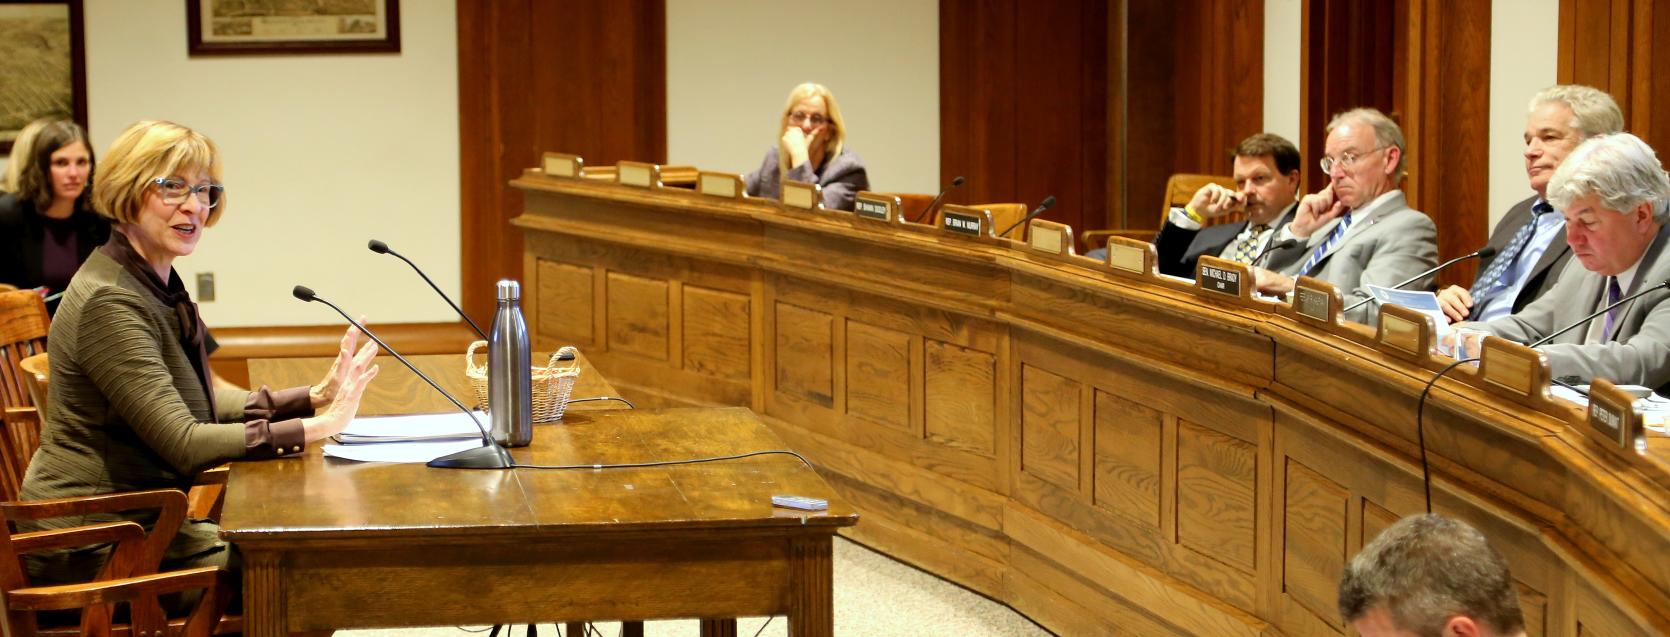 Auditor Bump testifies about the Revenue Accountability Act, a key part of her Accountability Agenda at the State House